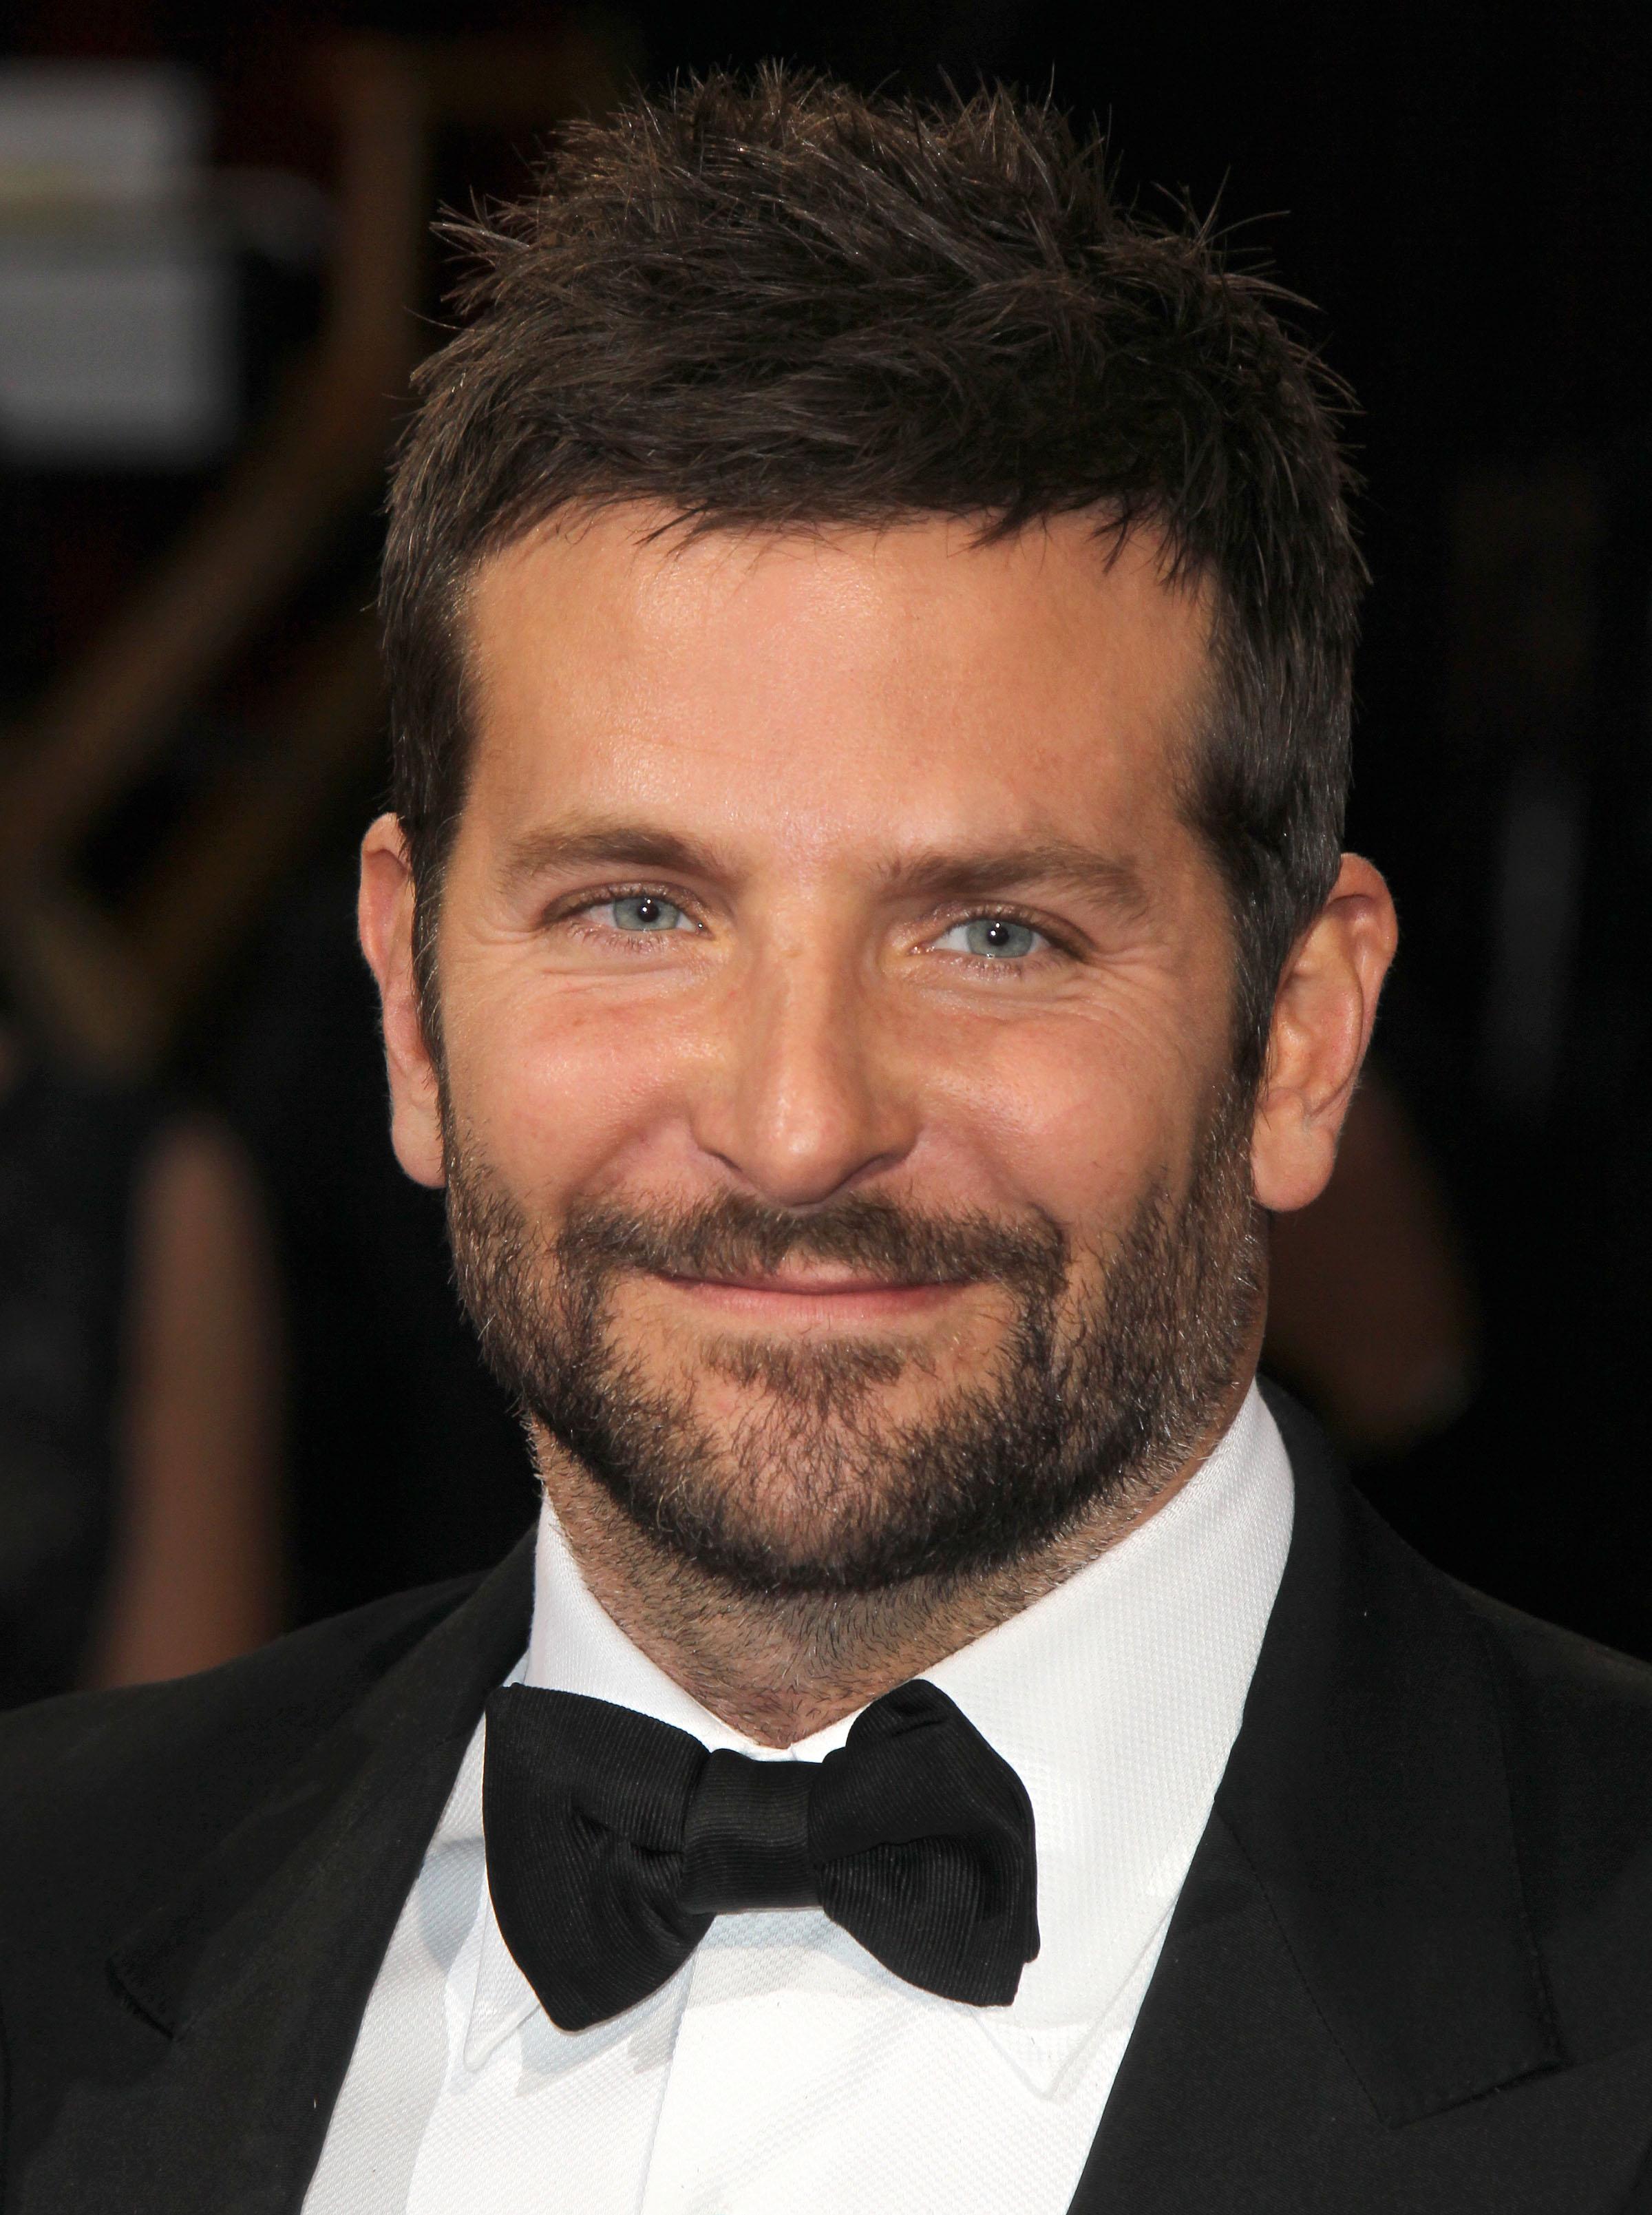 Bradley Cooper arrives at the 86th Annual Academy Awards in Los Angeles